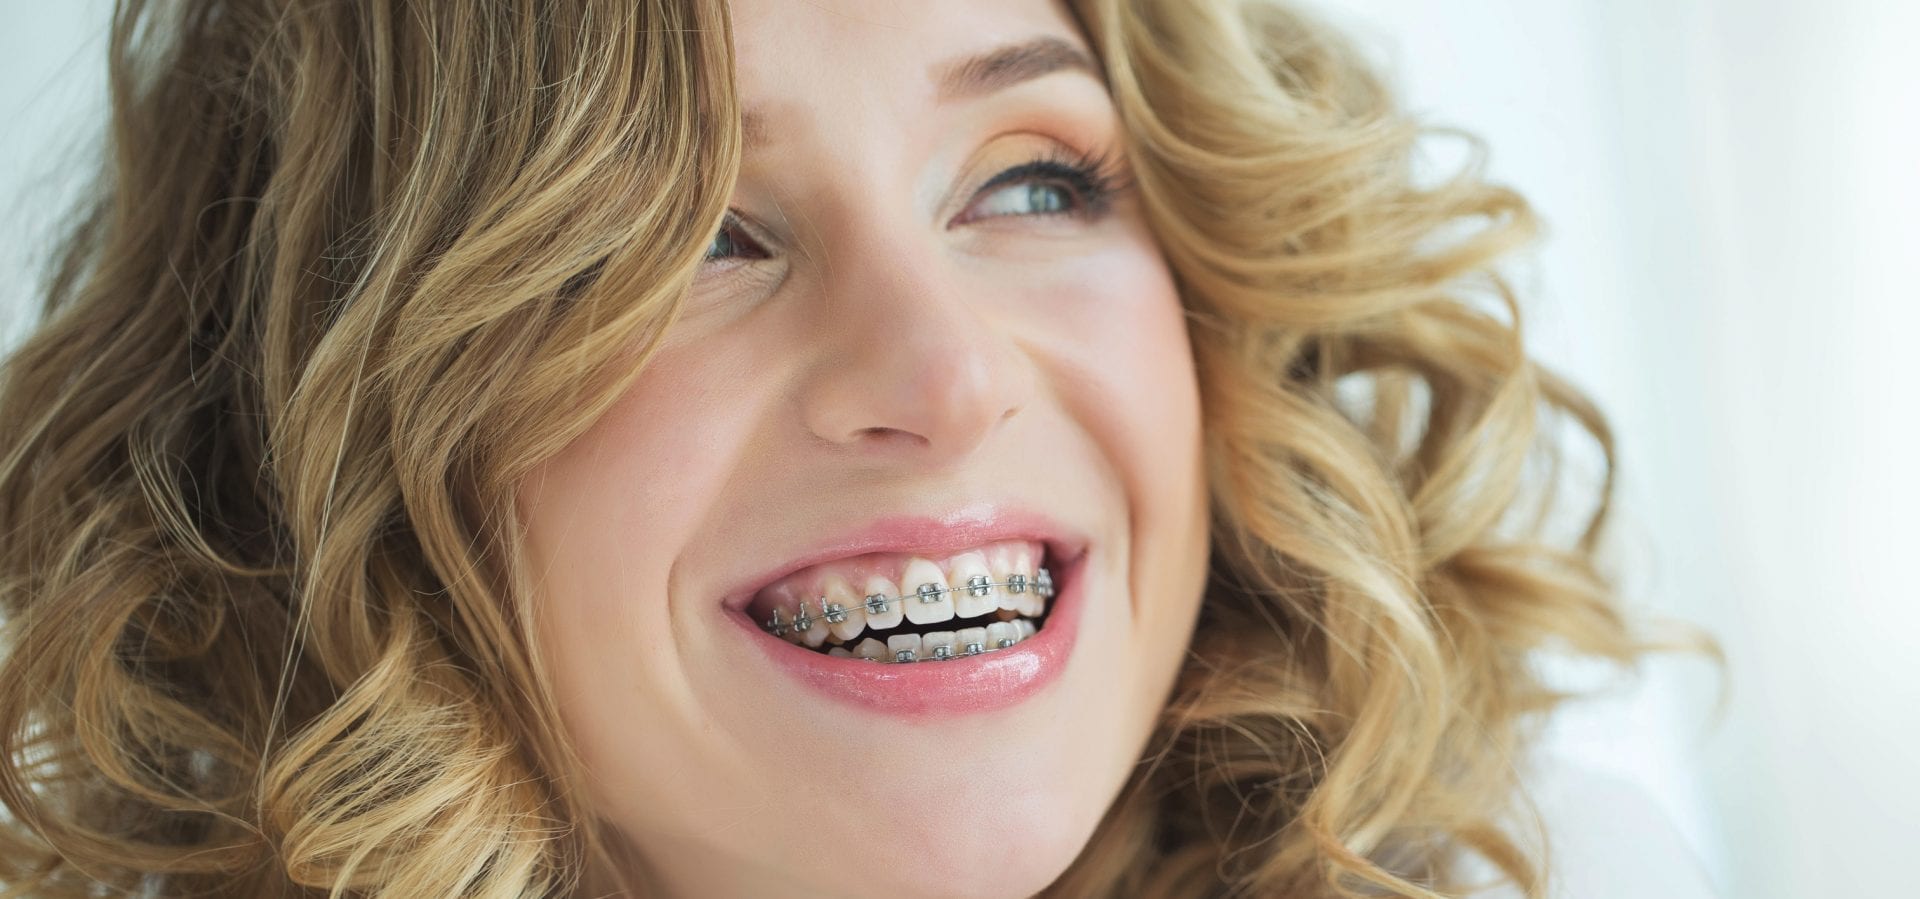 living with braces | Crane & Seager Orthodontics in Fort Collins and Loveland, CO